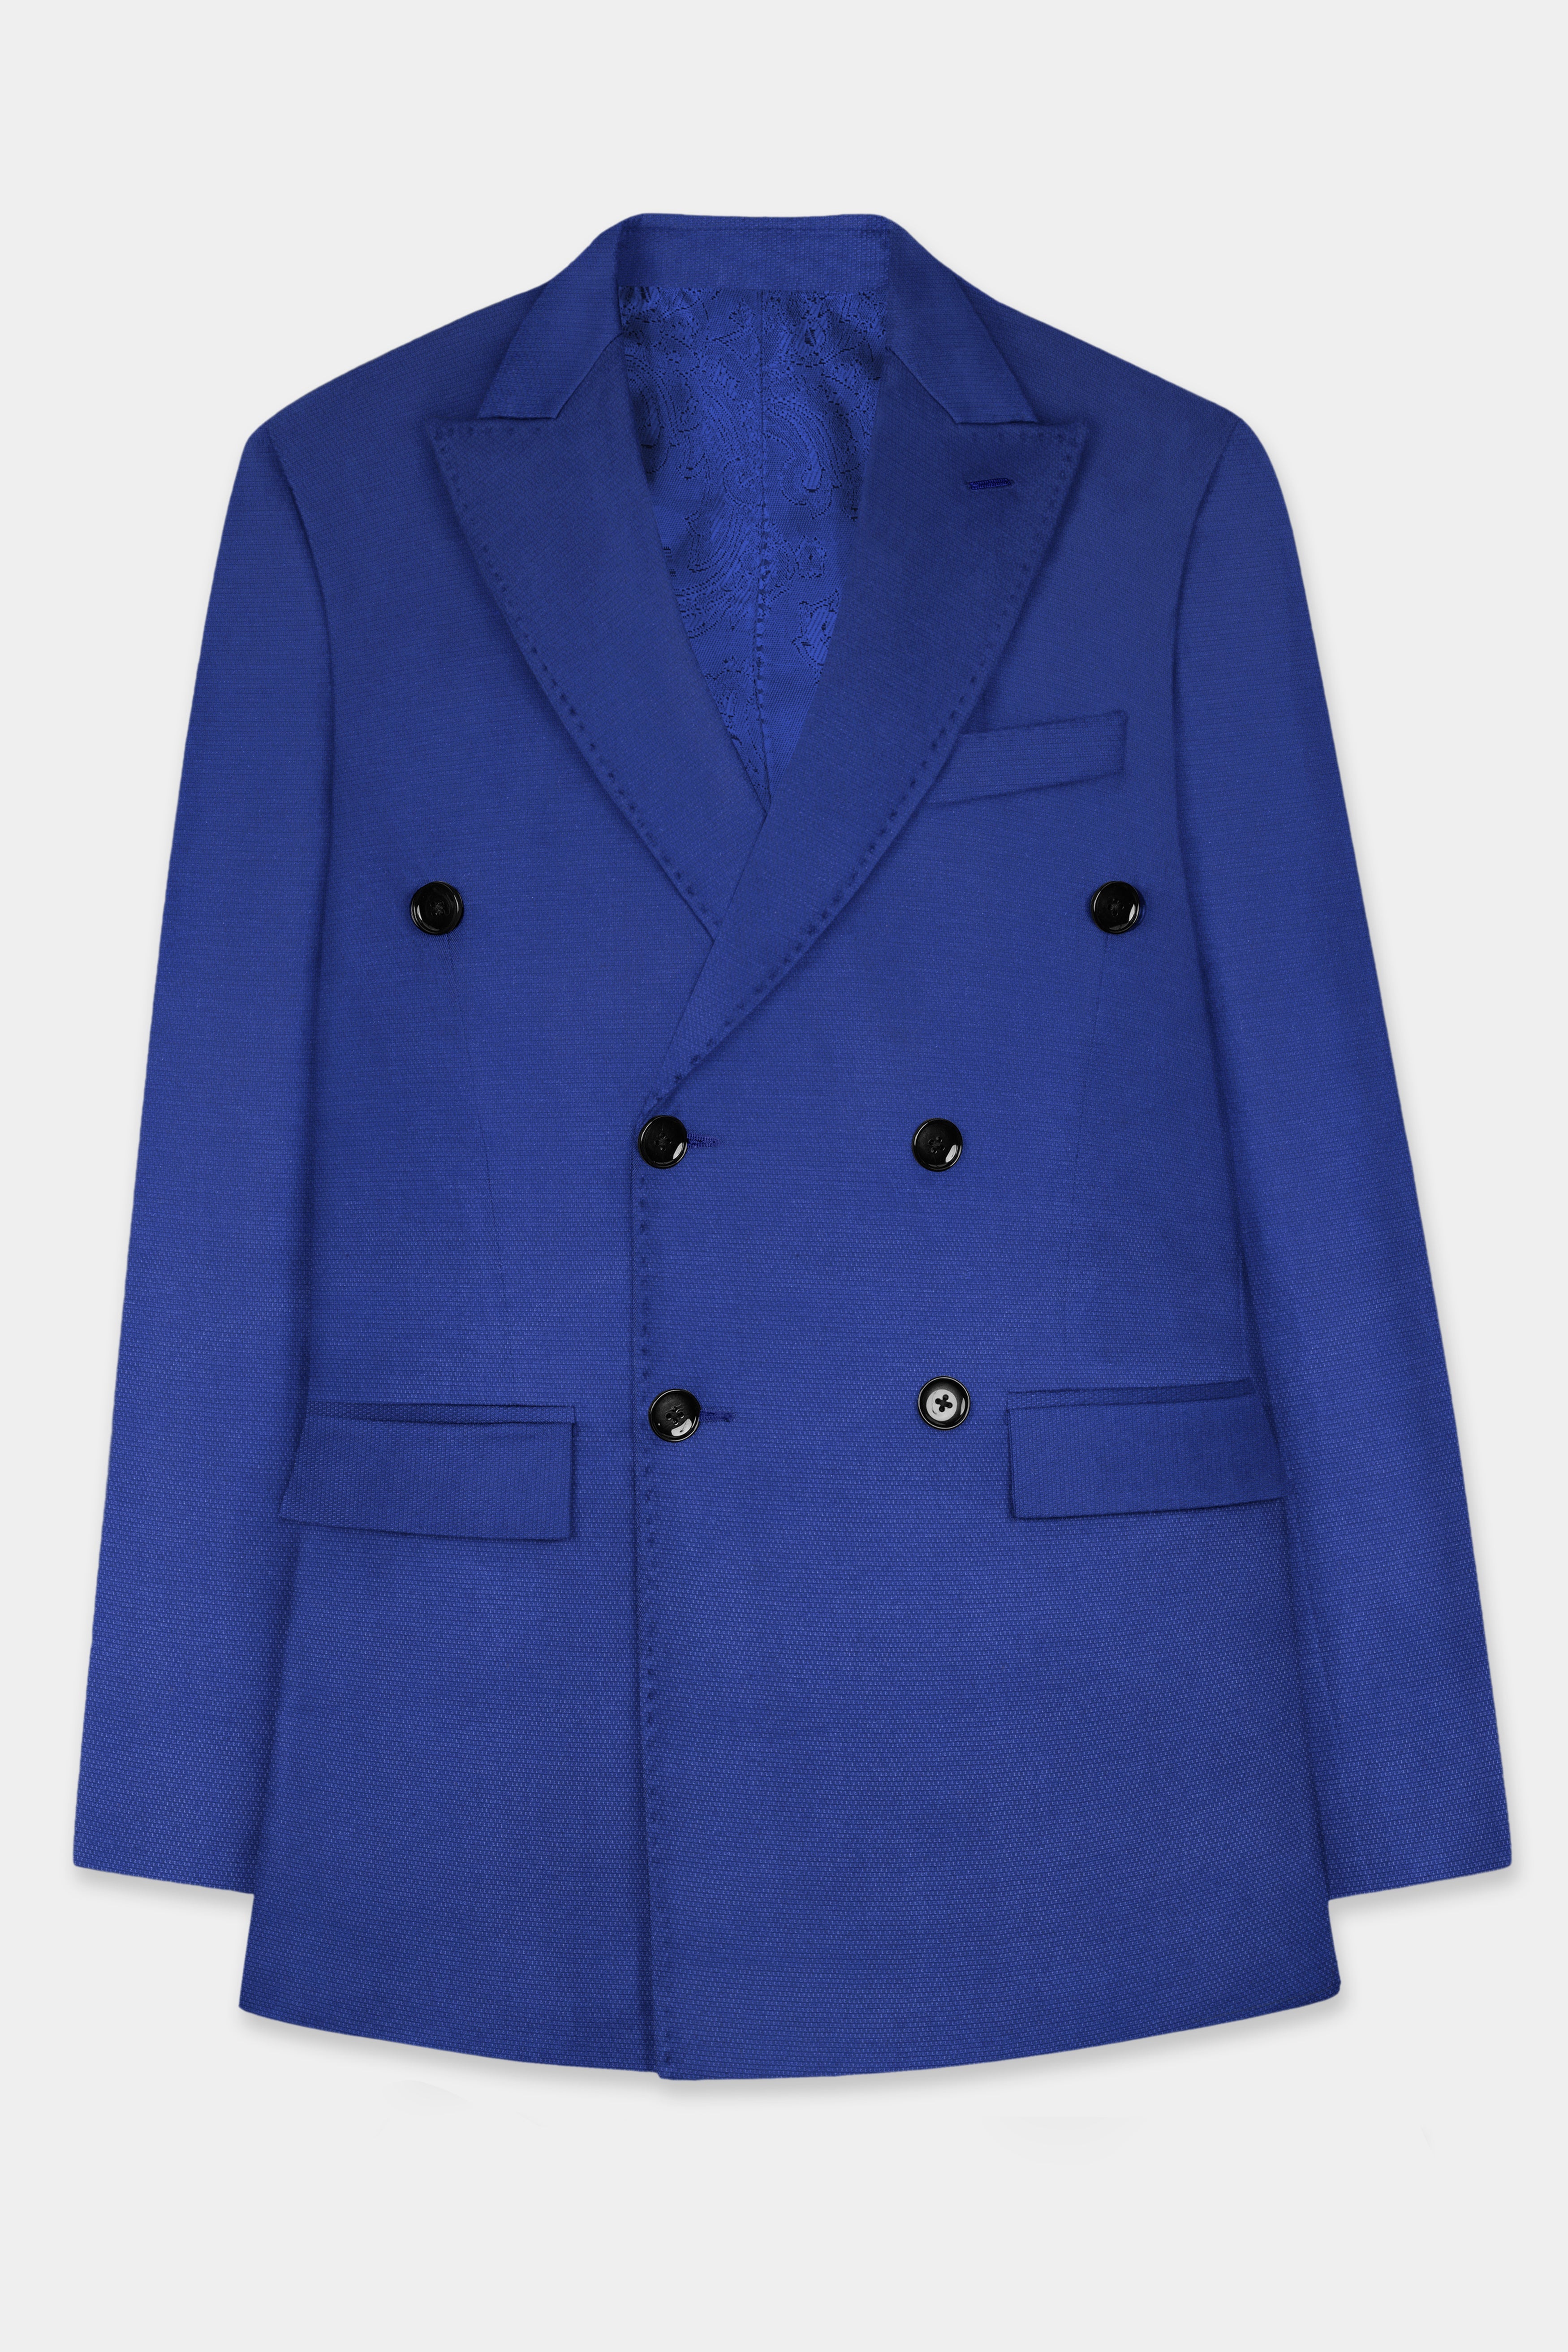 Catalina Blue Double-Breasted Wool Blend Blazer